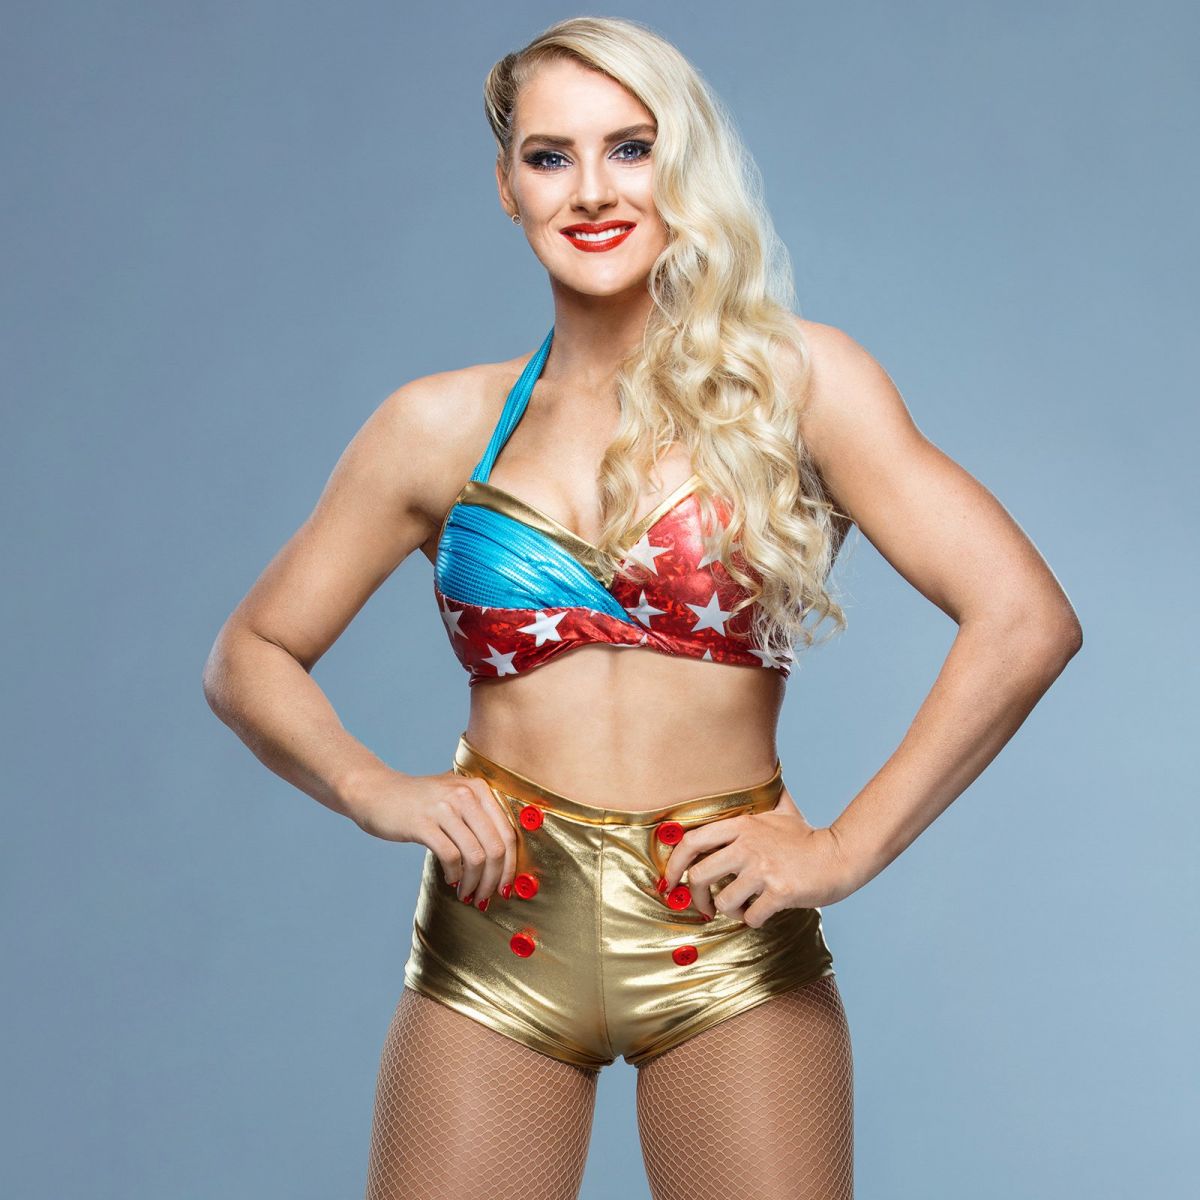 WWE - Lacey Evans Celebrates 4th of July. 